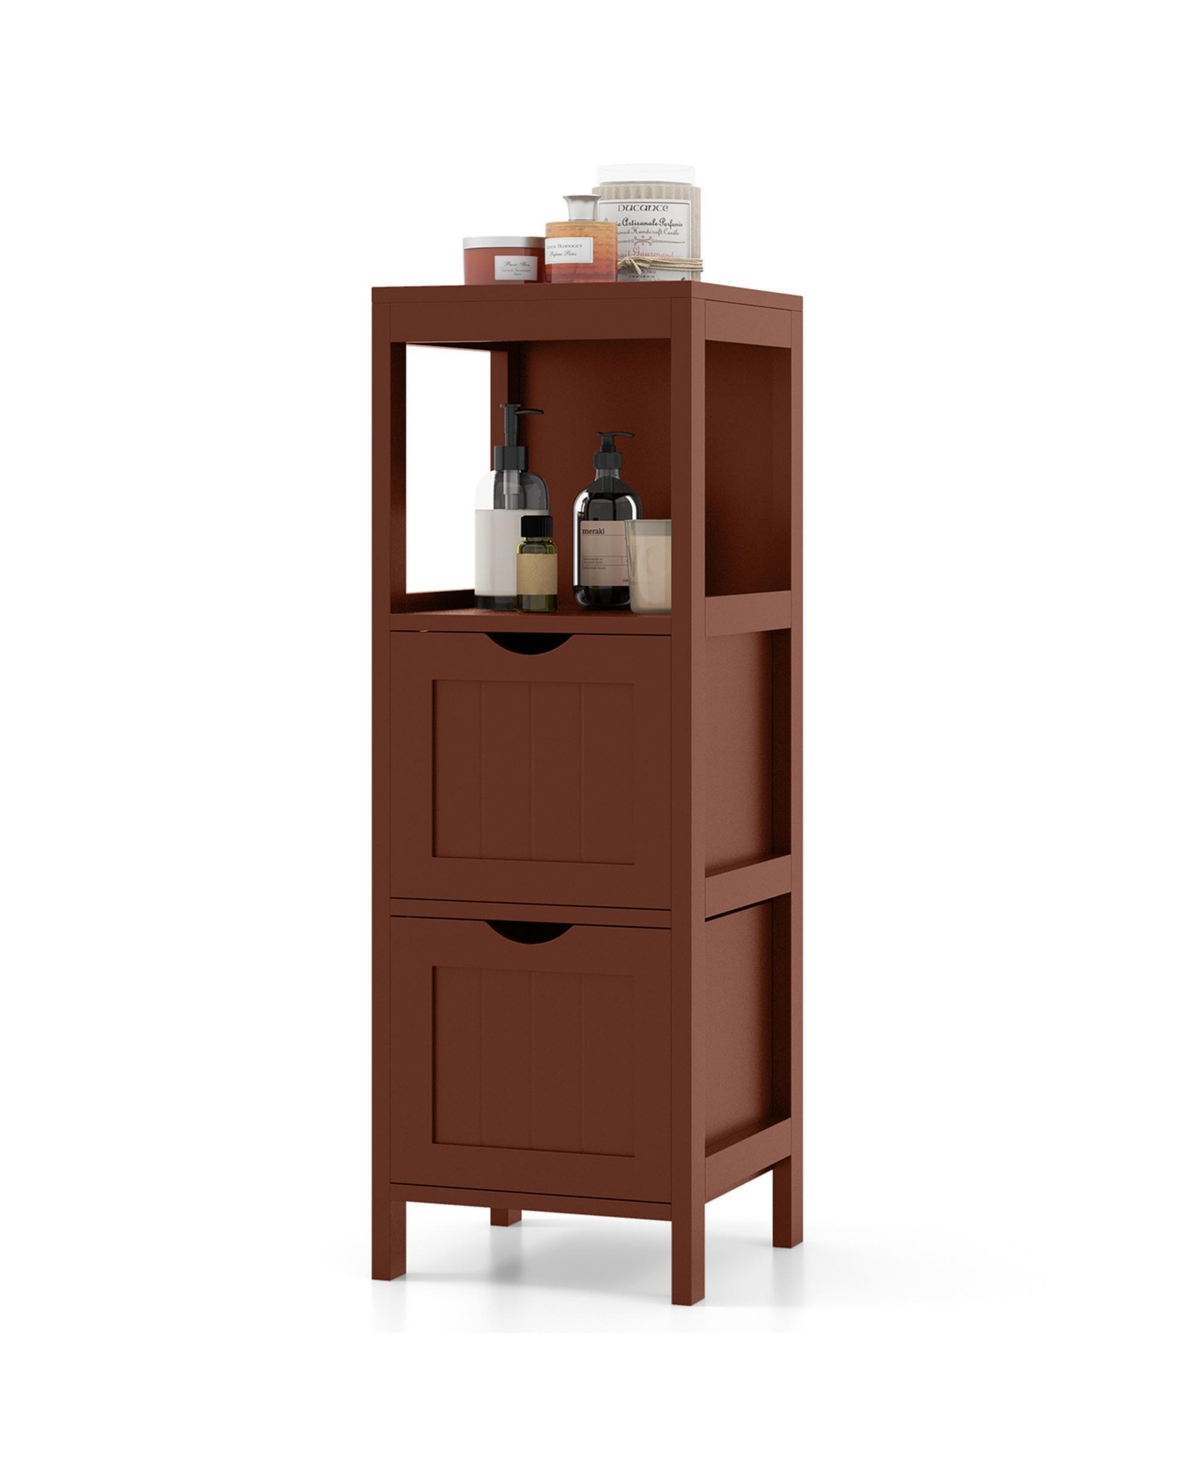 Bathroom Floor Cabinet Freestanding Side Storage Organizer with 2 Removable Drawers - Brown